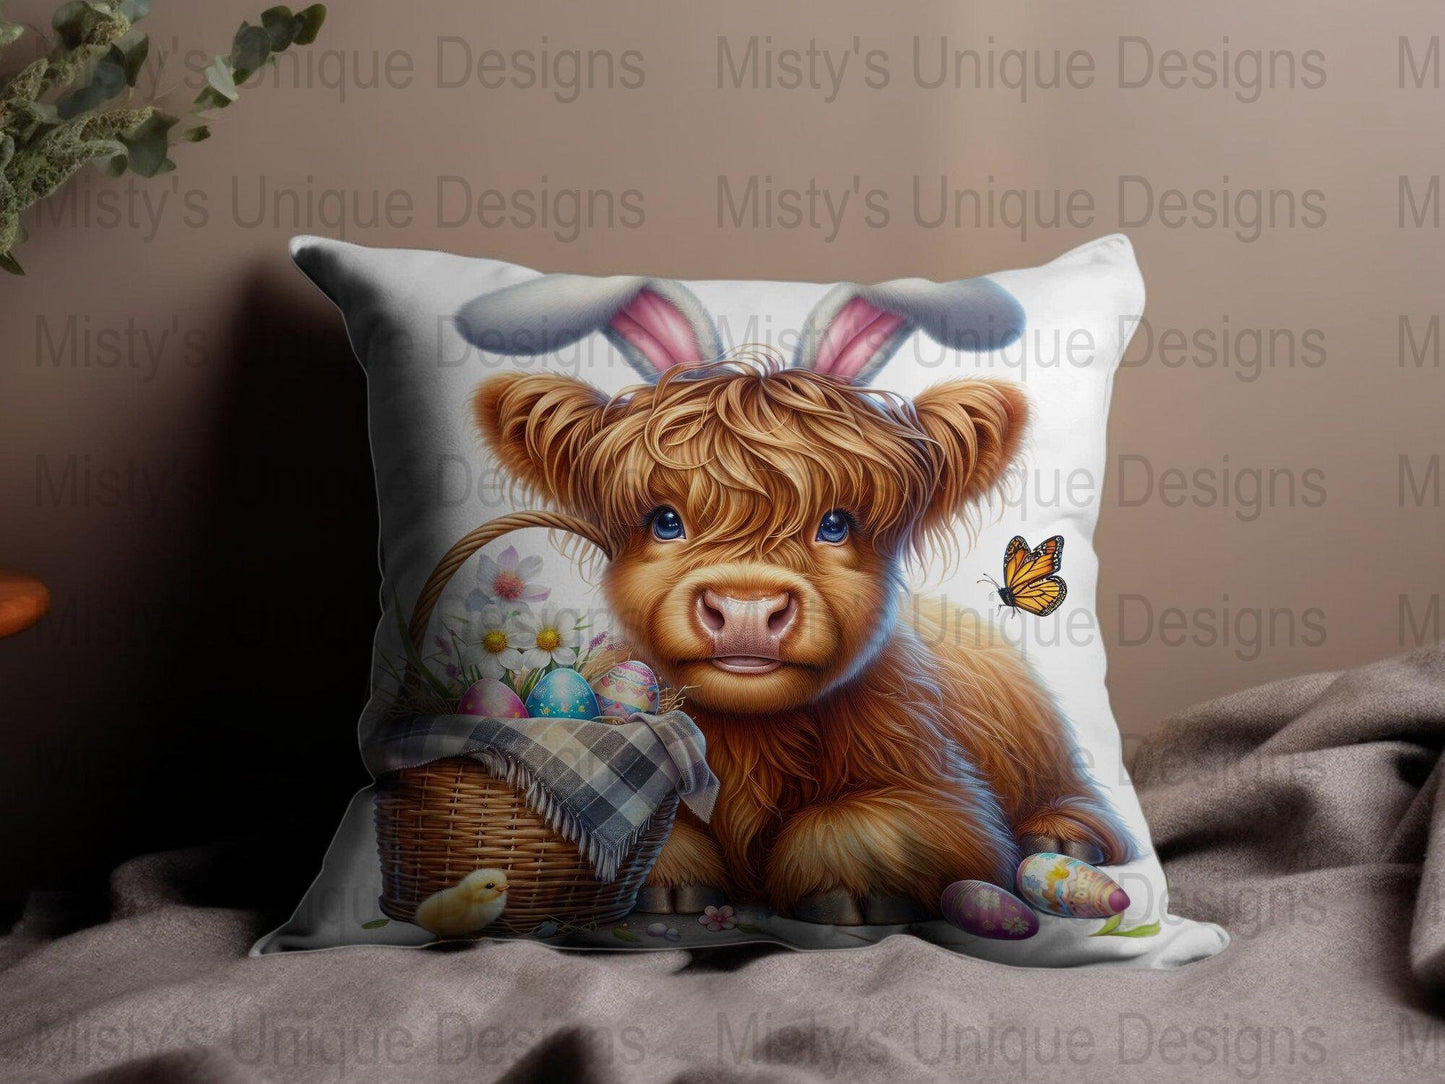 Highland Cow Easter Basket Digital Download, Cute Spring Clipart PNG, Printable Animal Art with Bunny Ears